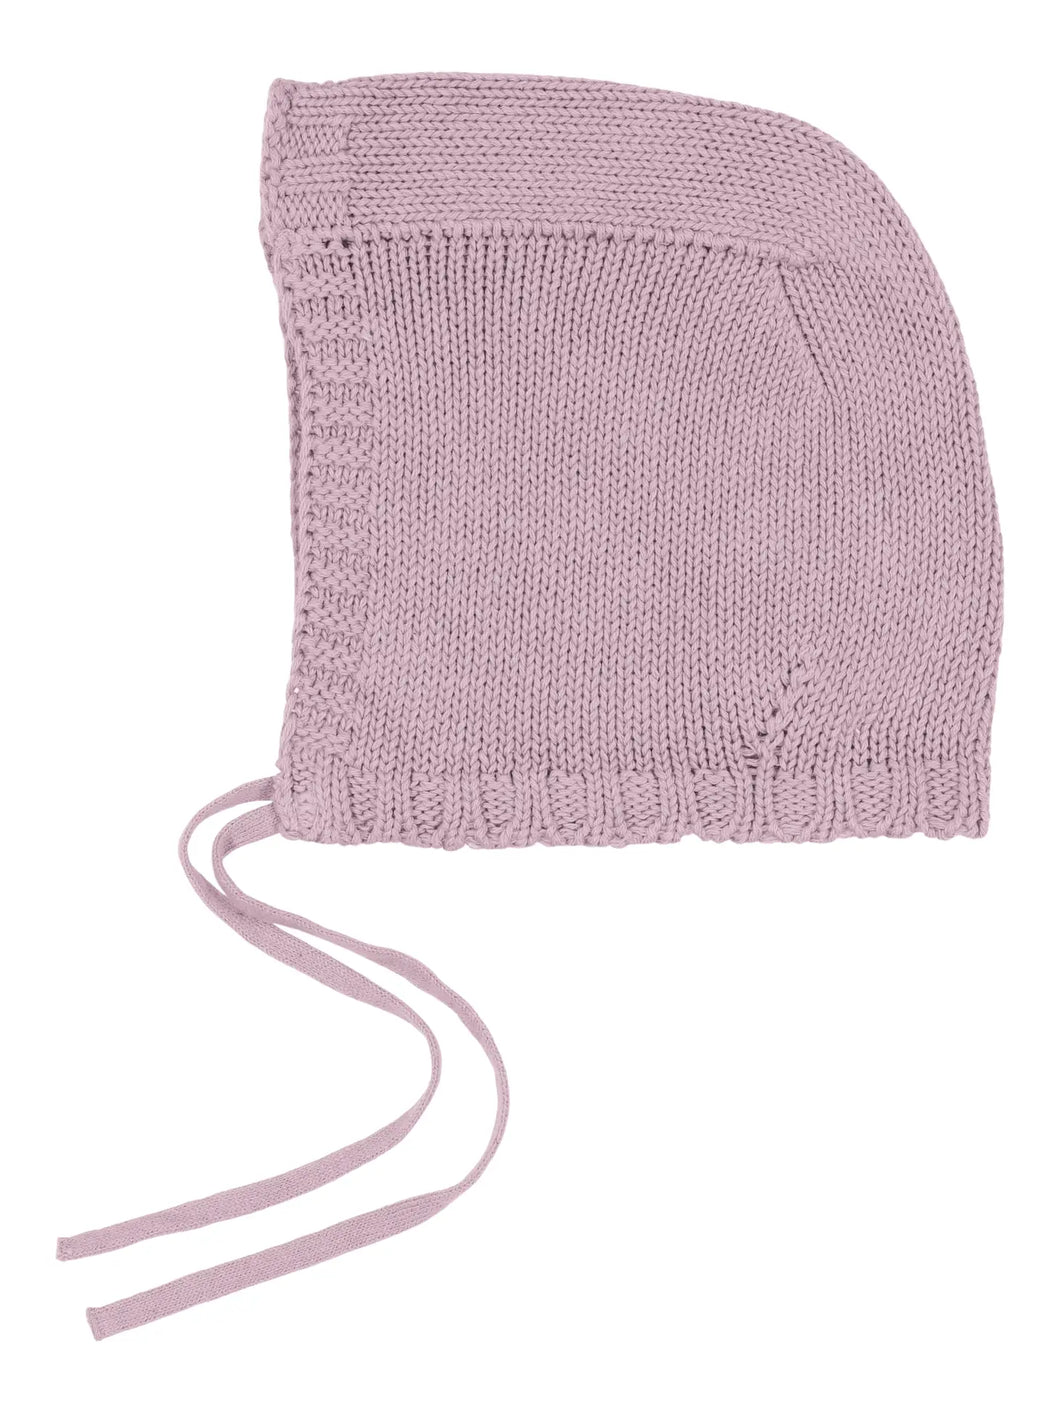 sweetly knit bonnet in lilac